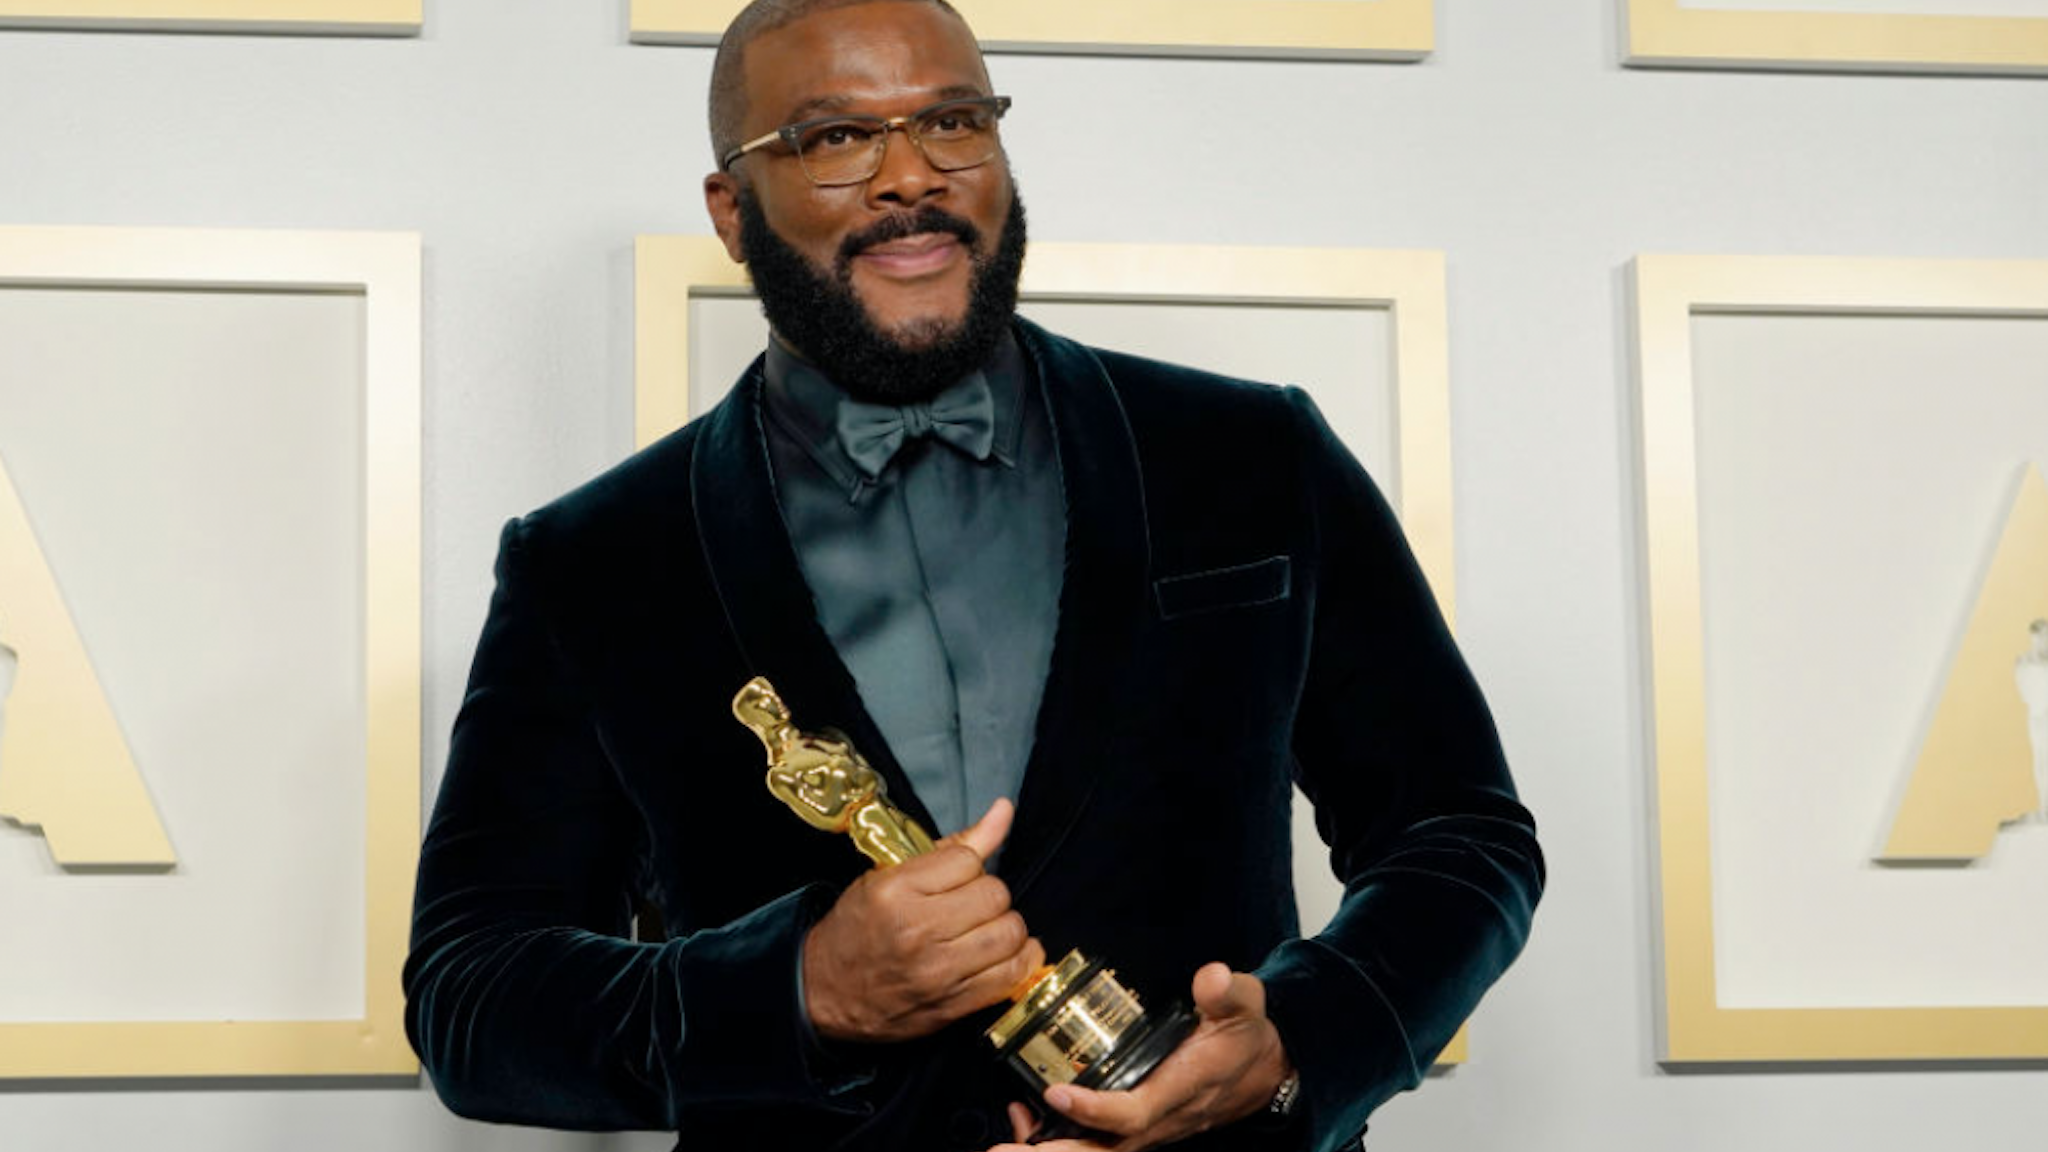 Tyler Perry, winner of the Jean Hersholt Humanitarian Award, poses in the press room during the Oscars on Sunday, April 25, 2021, at Union Station in Los Angeles.